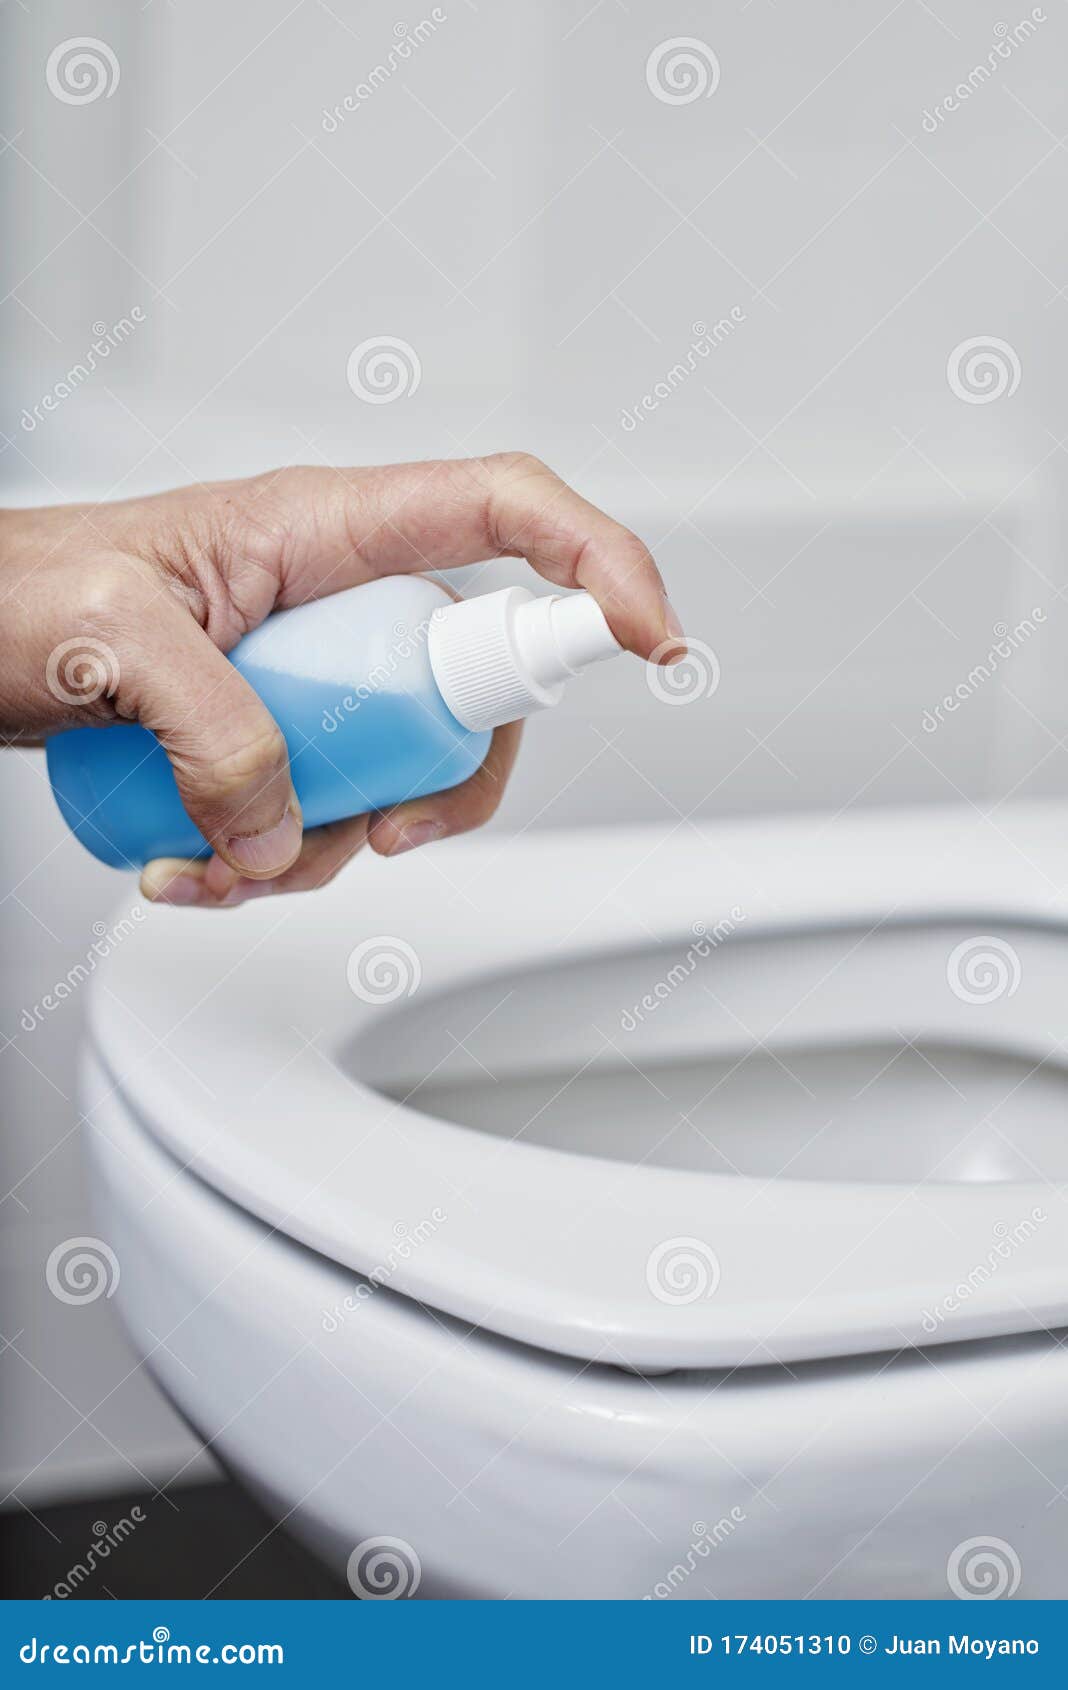 Hand Down Or Raise The Toilet Seat Stock Photo - Image of 